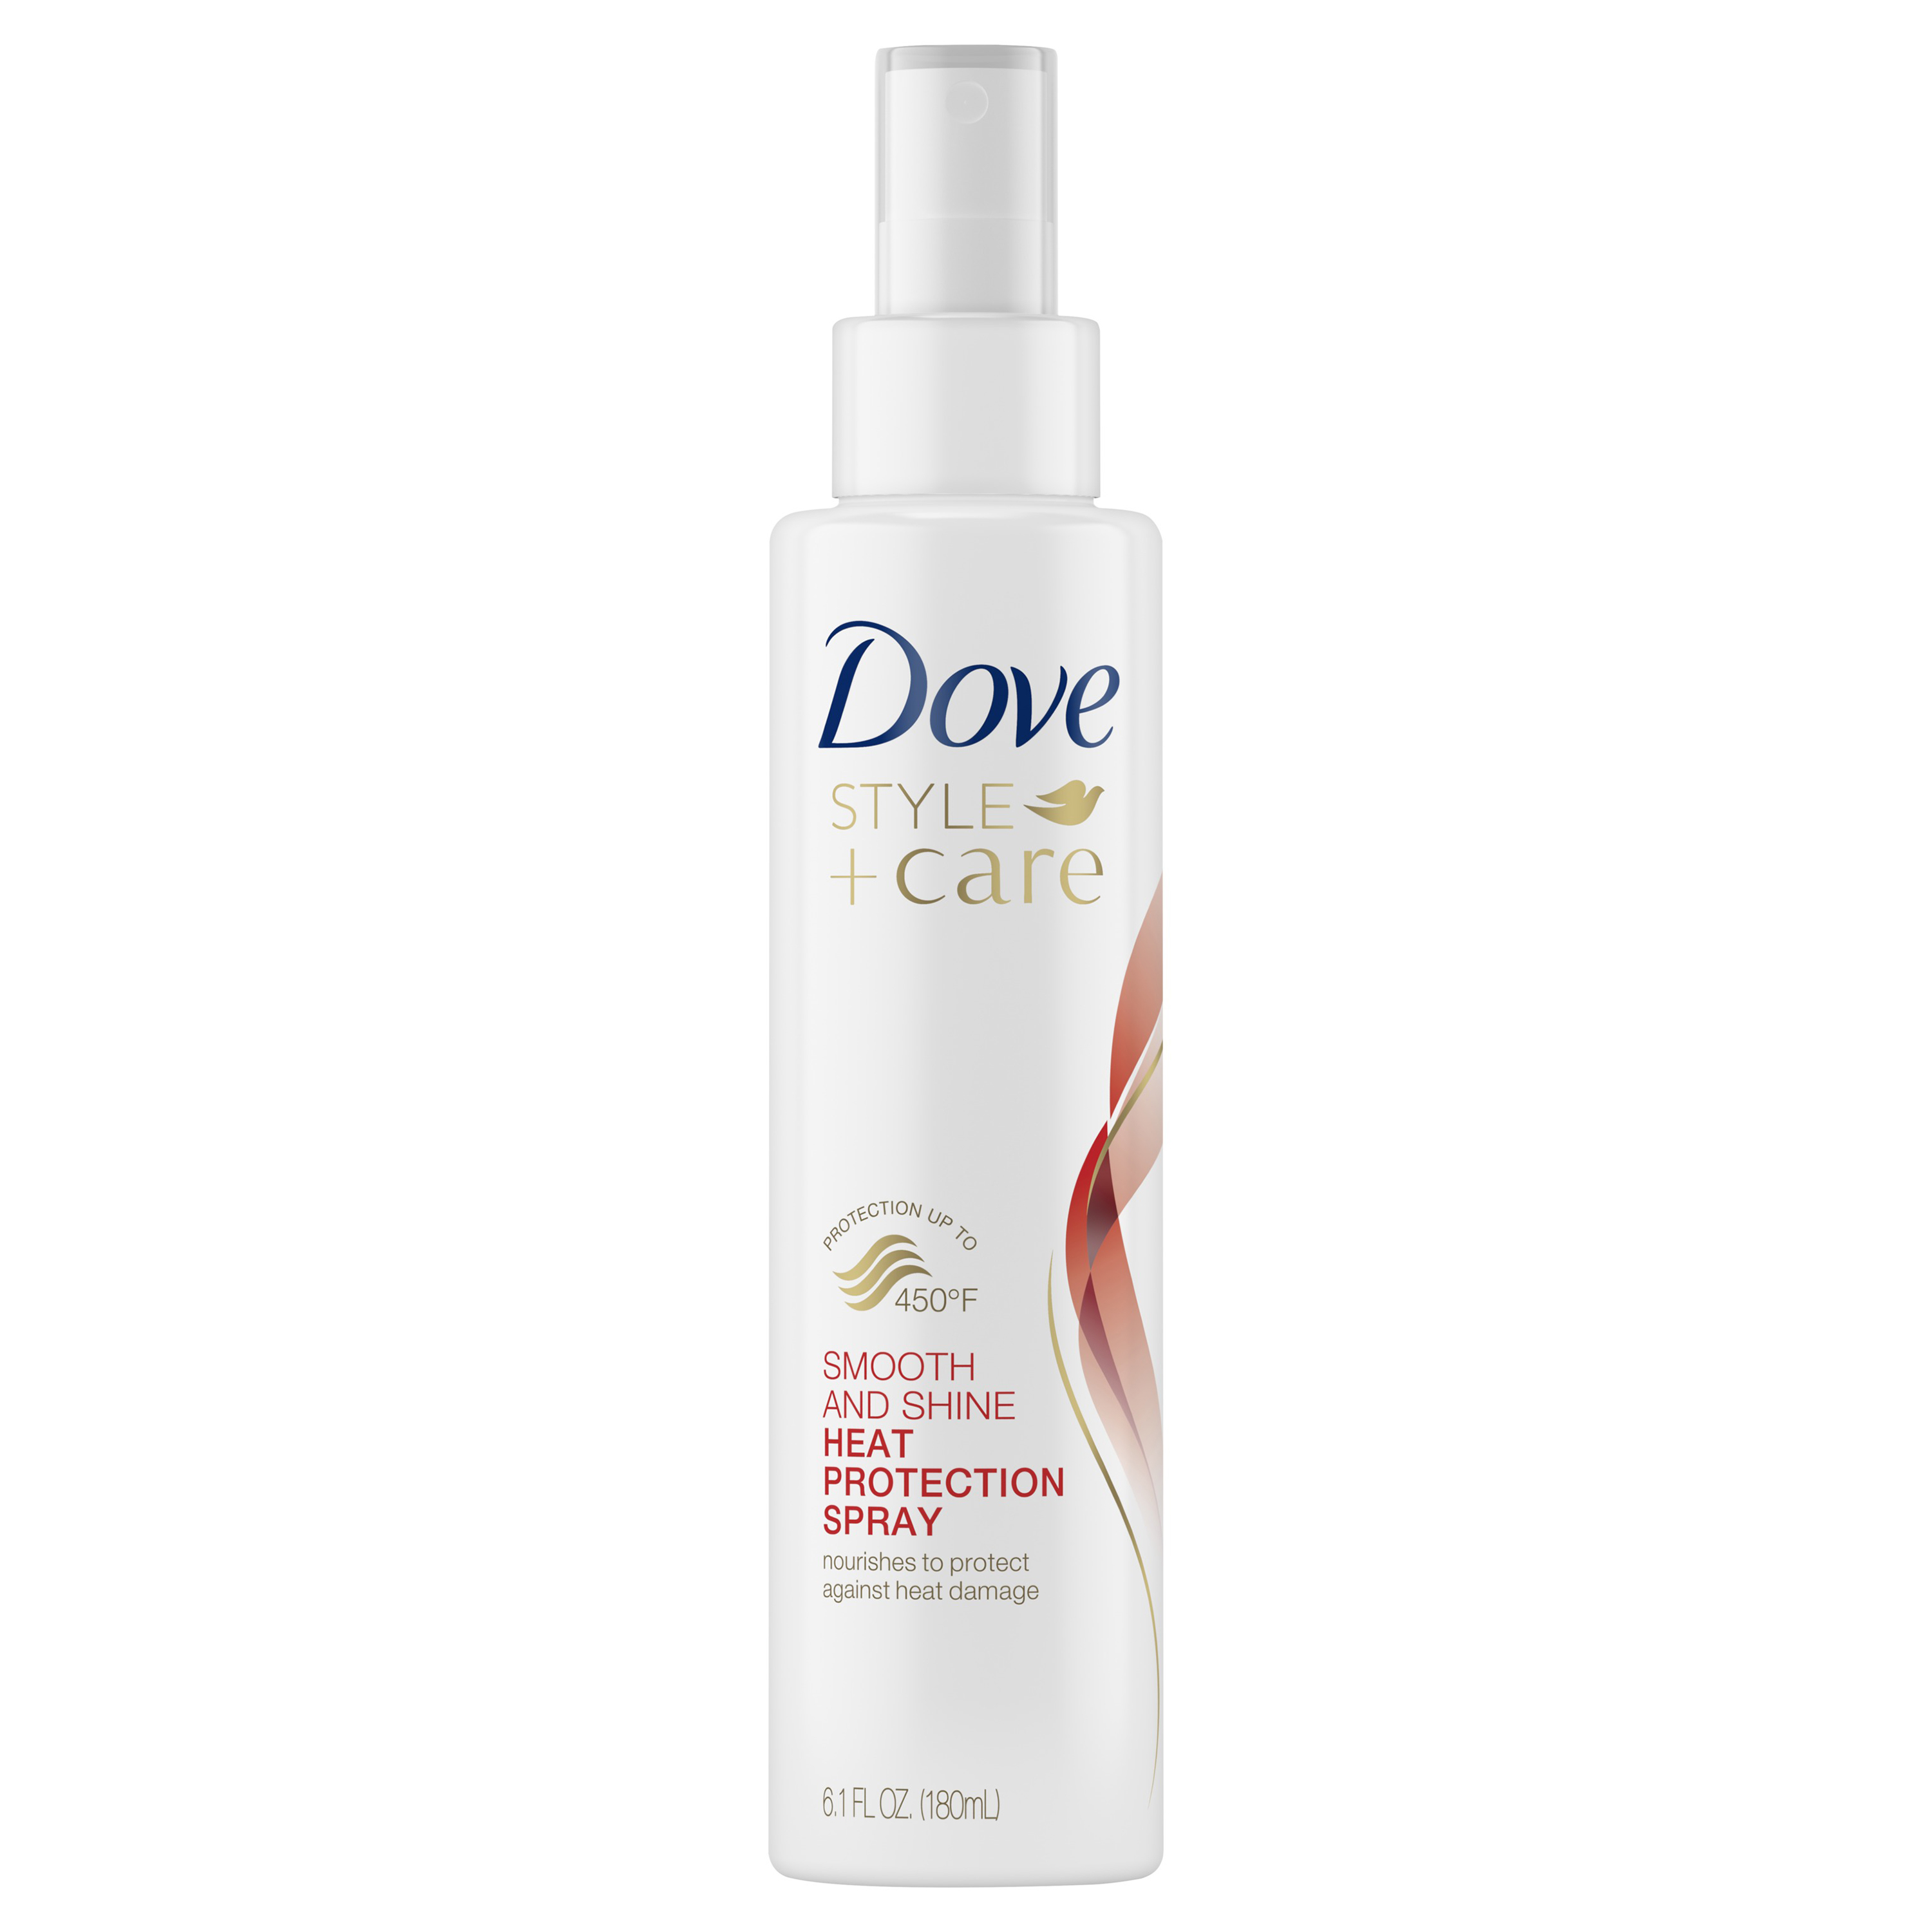 Dove Style+Care Smooth & Shine Heat-Protect Spray , 6.1 oz - image 1 of 6